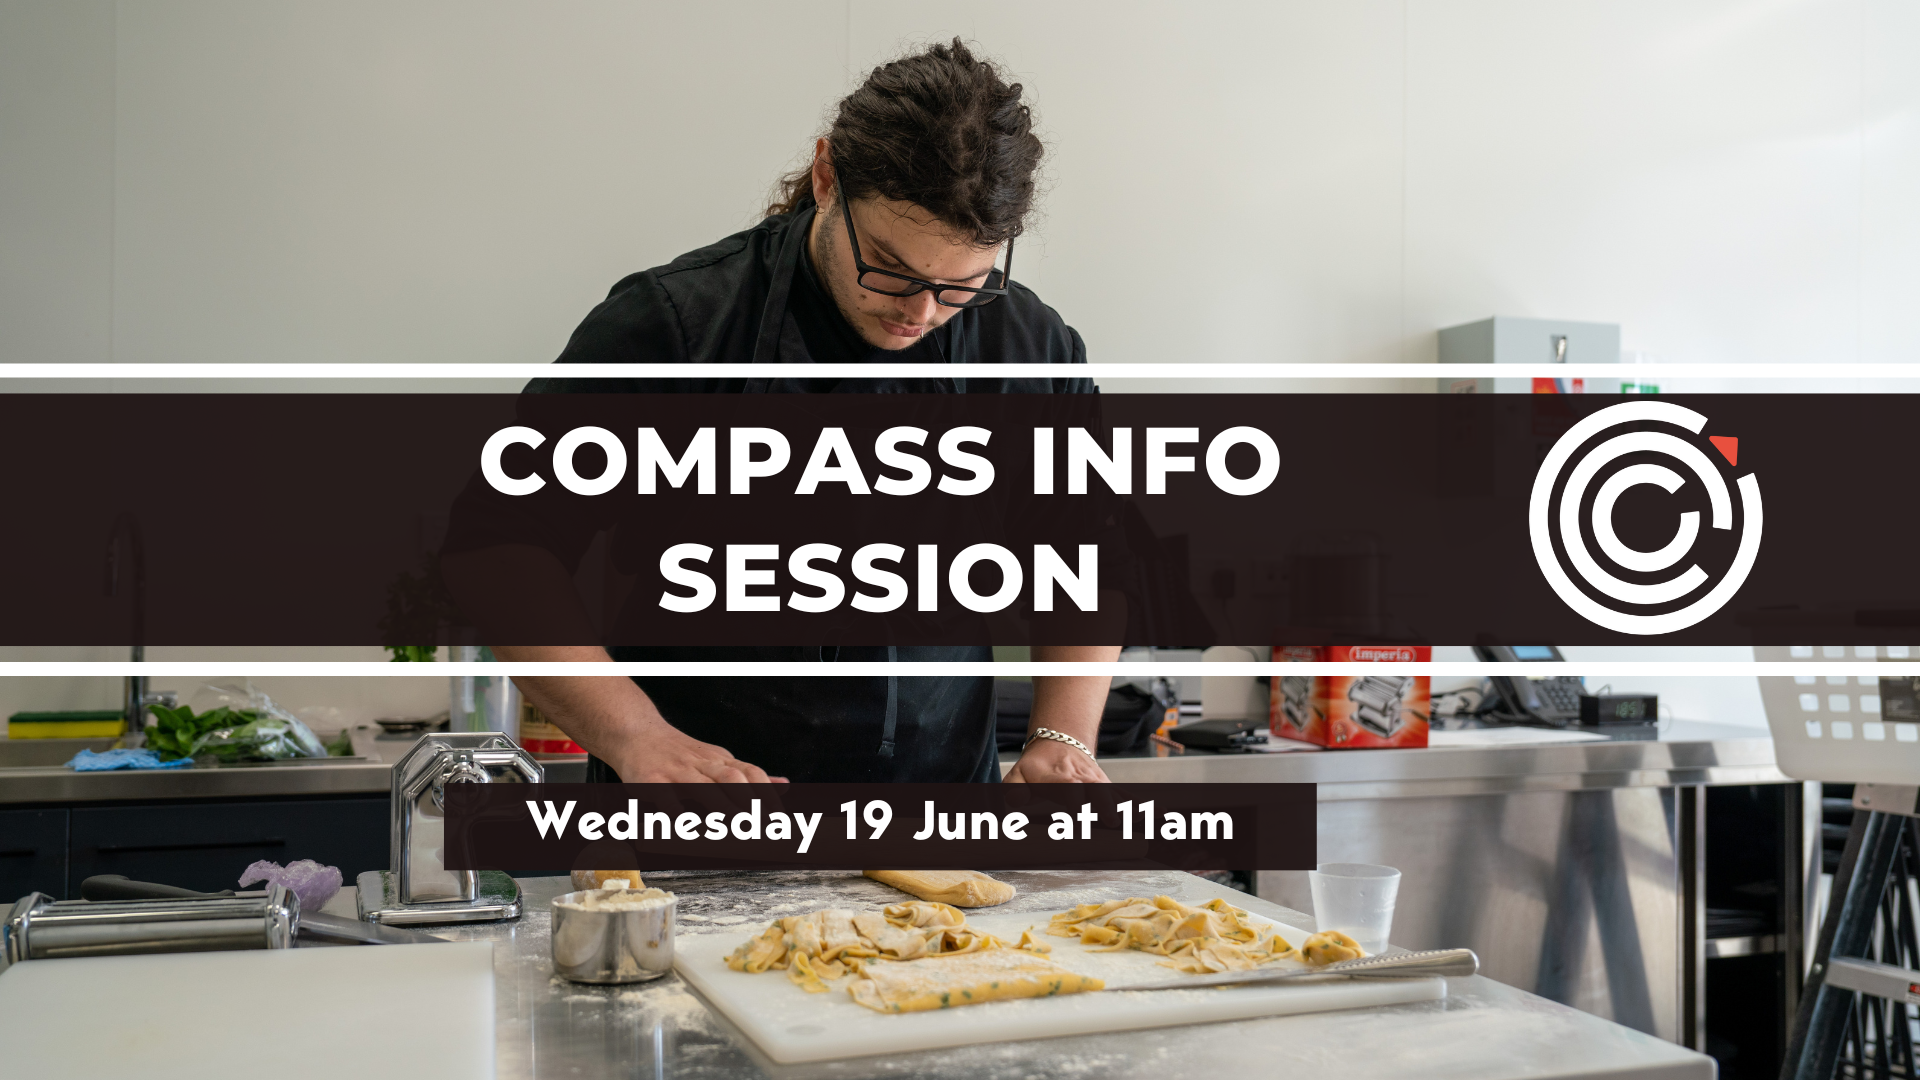 Compass Info Session - Wednesday 19 June